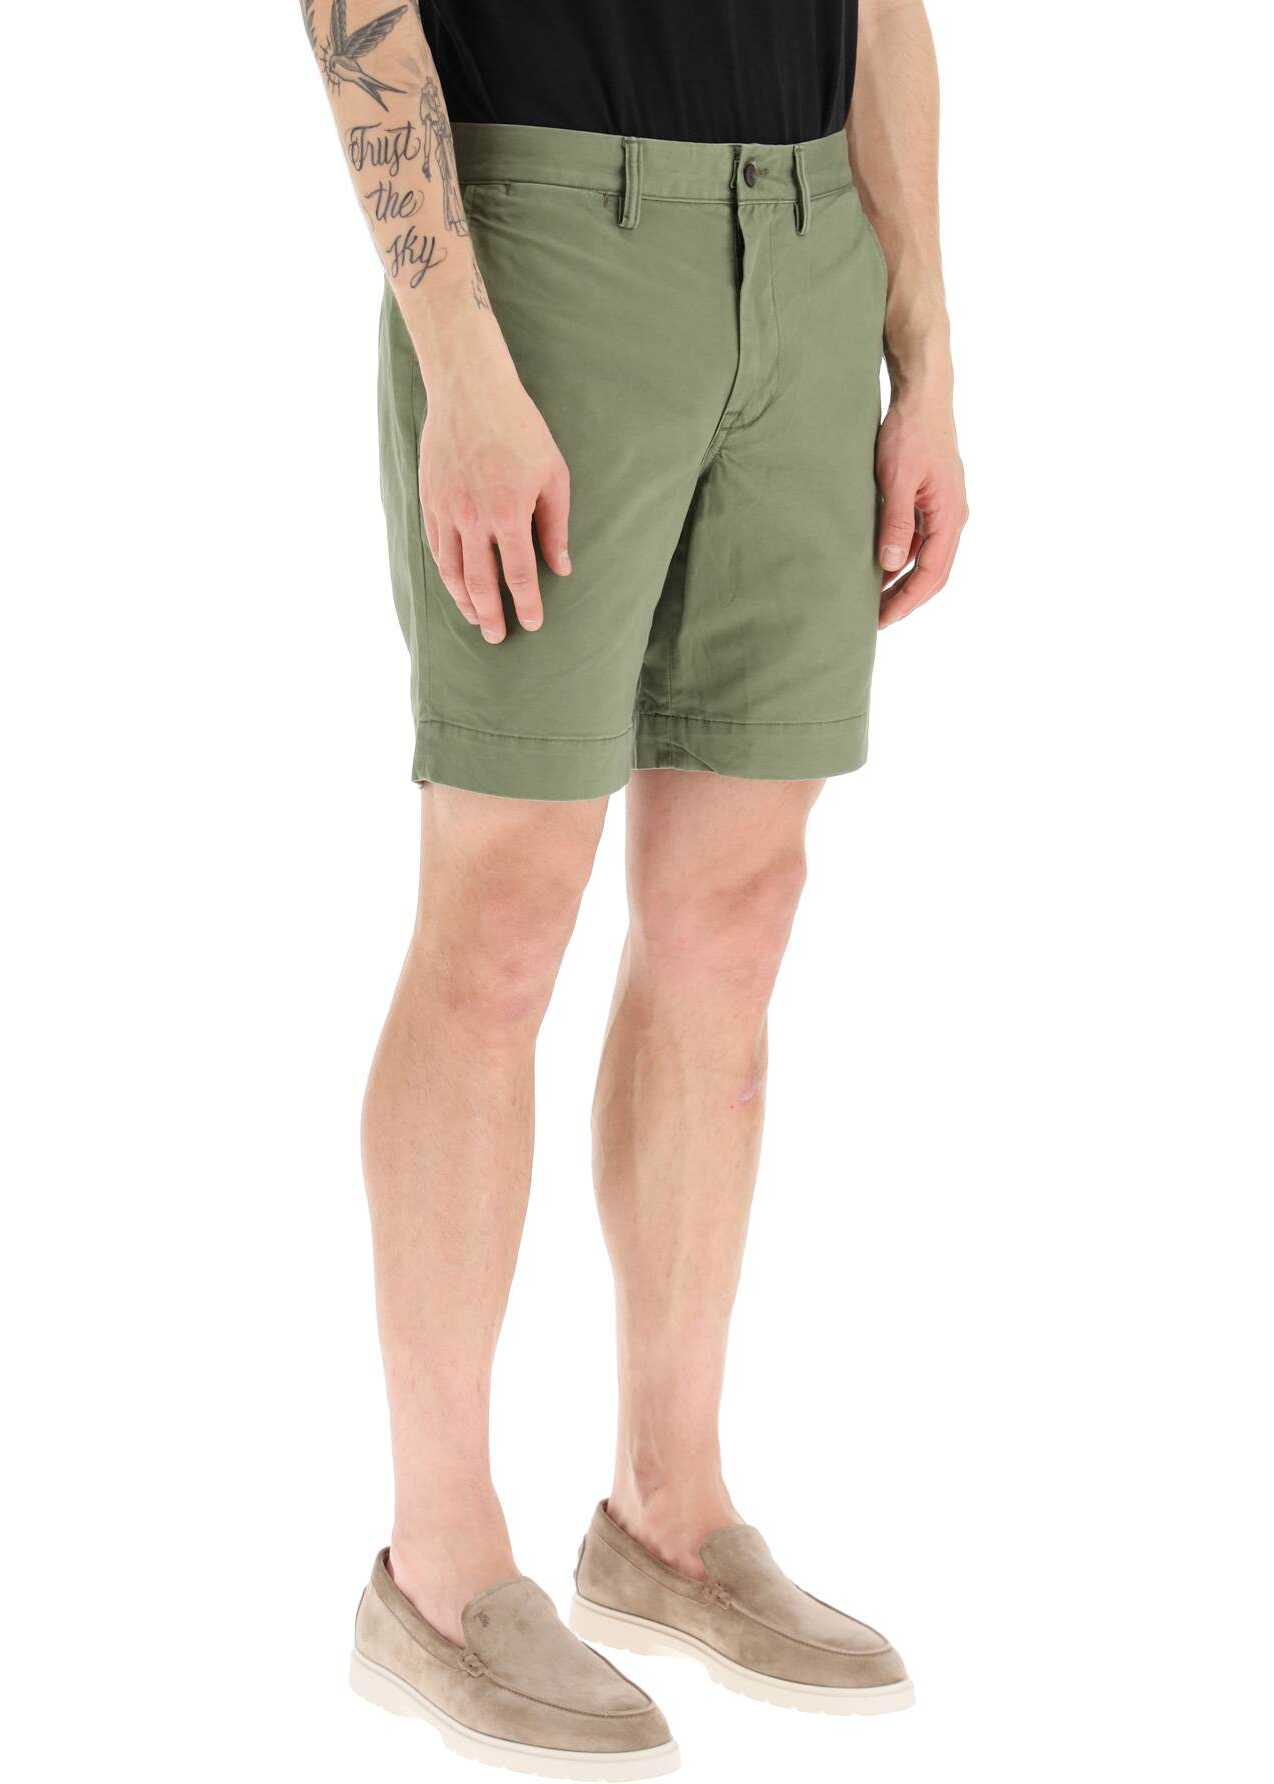 Ralph Lauren Stretch Chino Shorts ARMY OLIVE